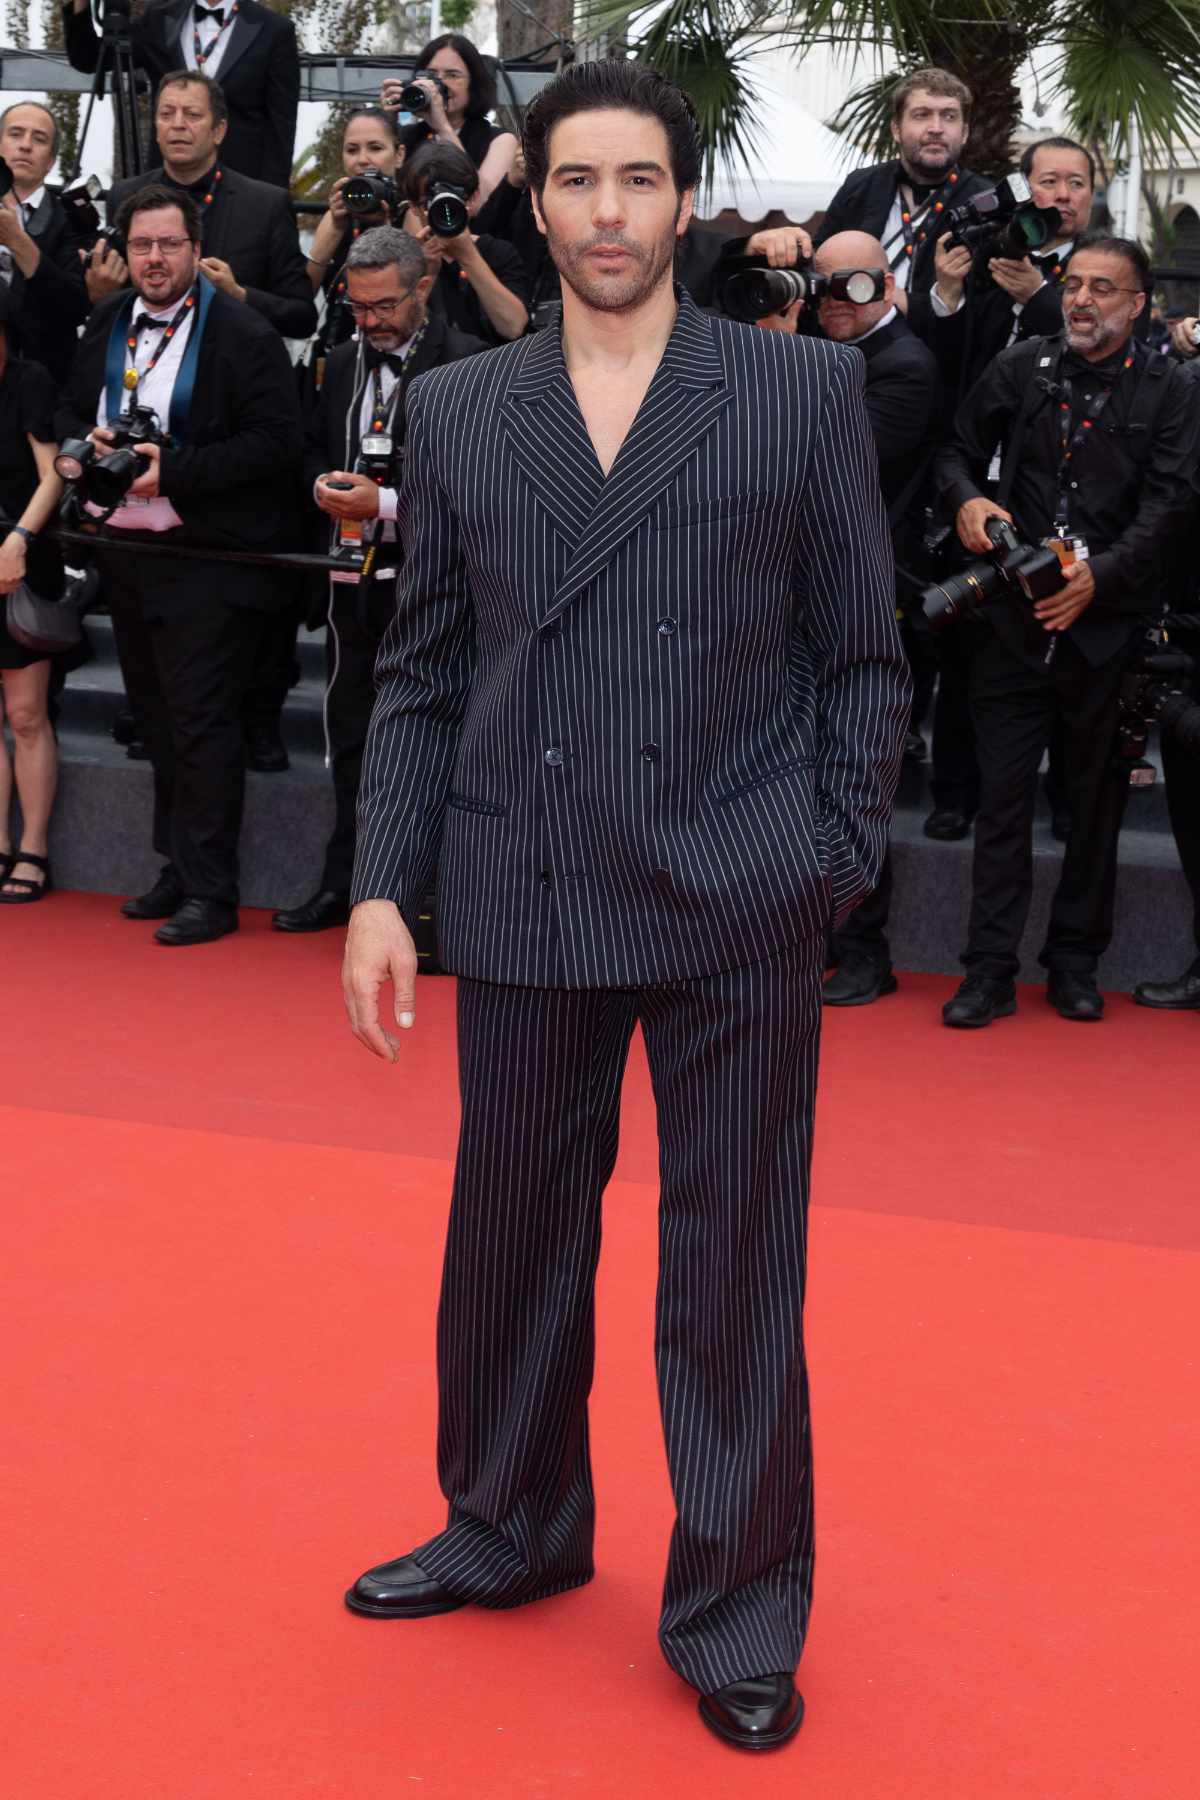 LV At Cannes Film Festival: 